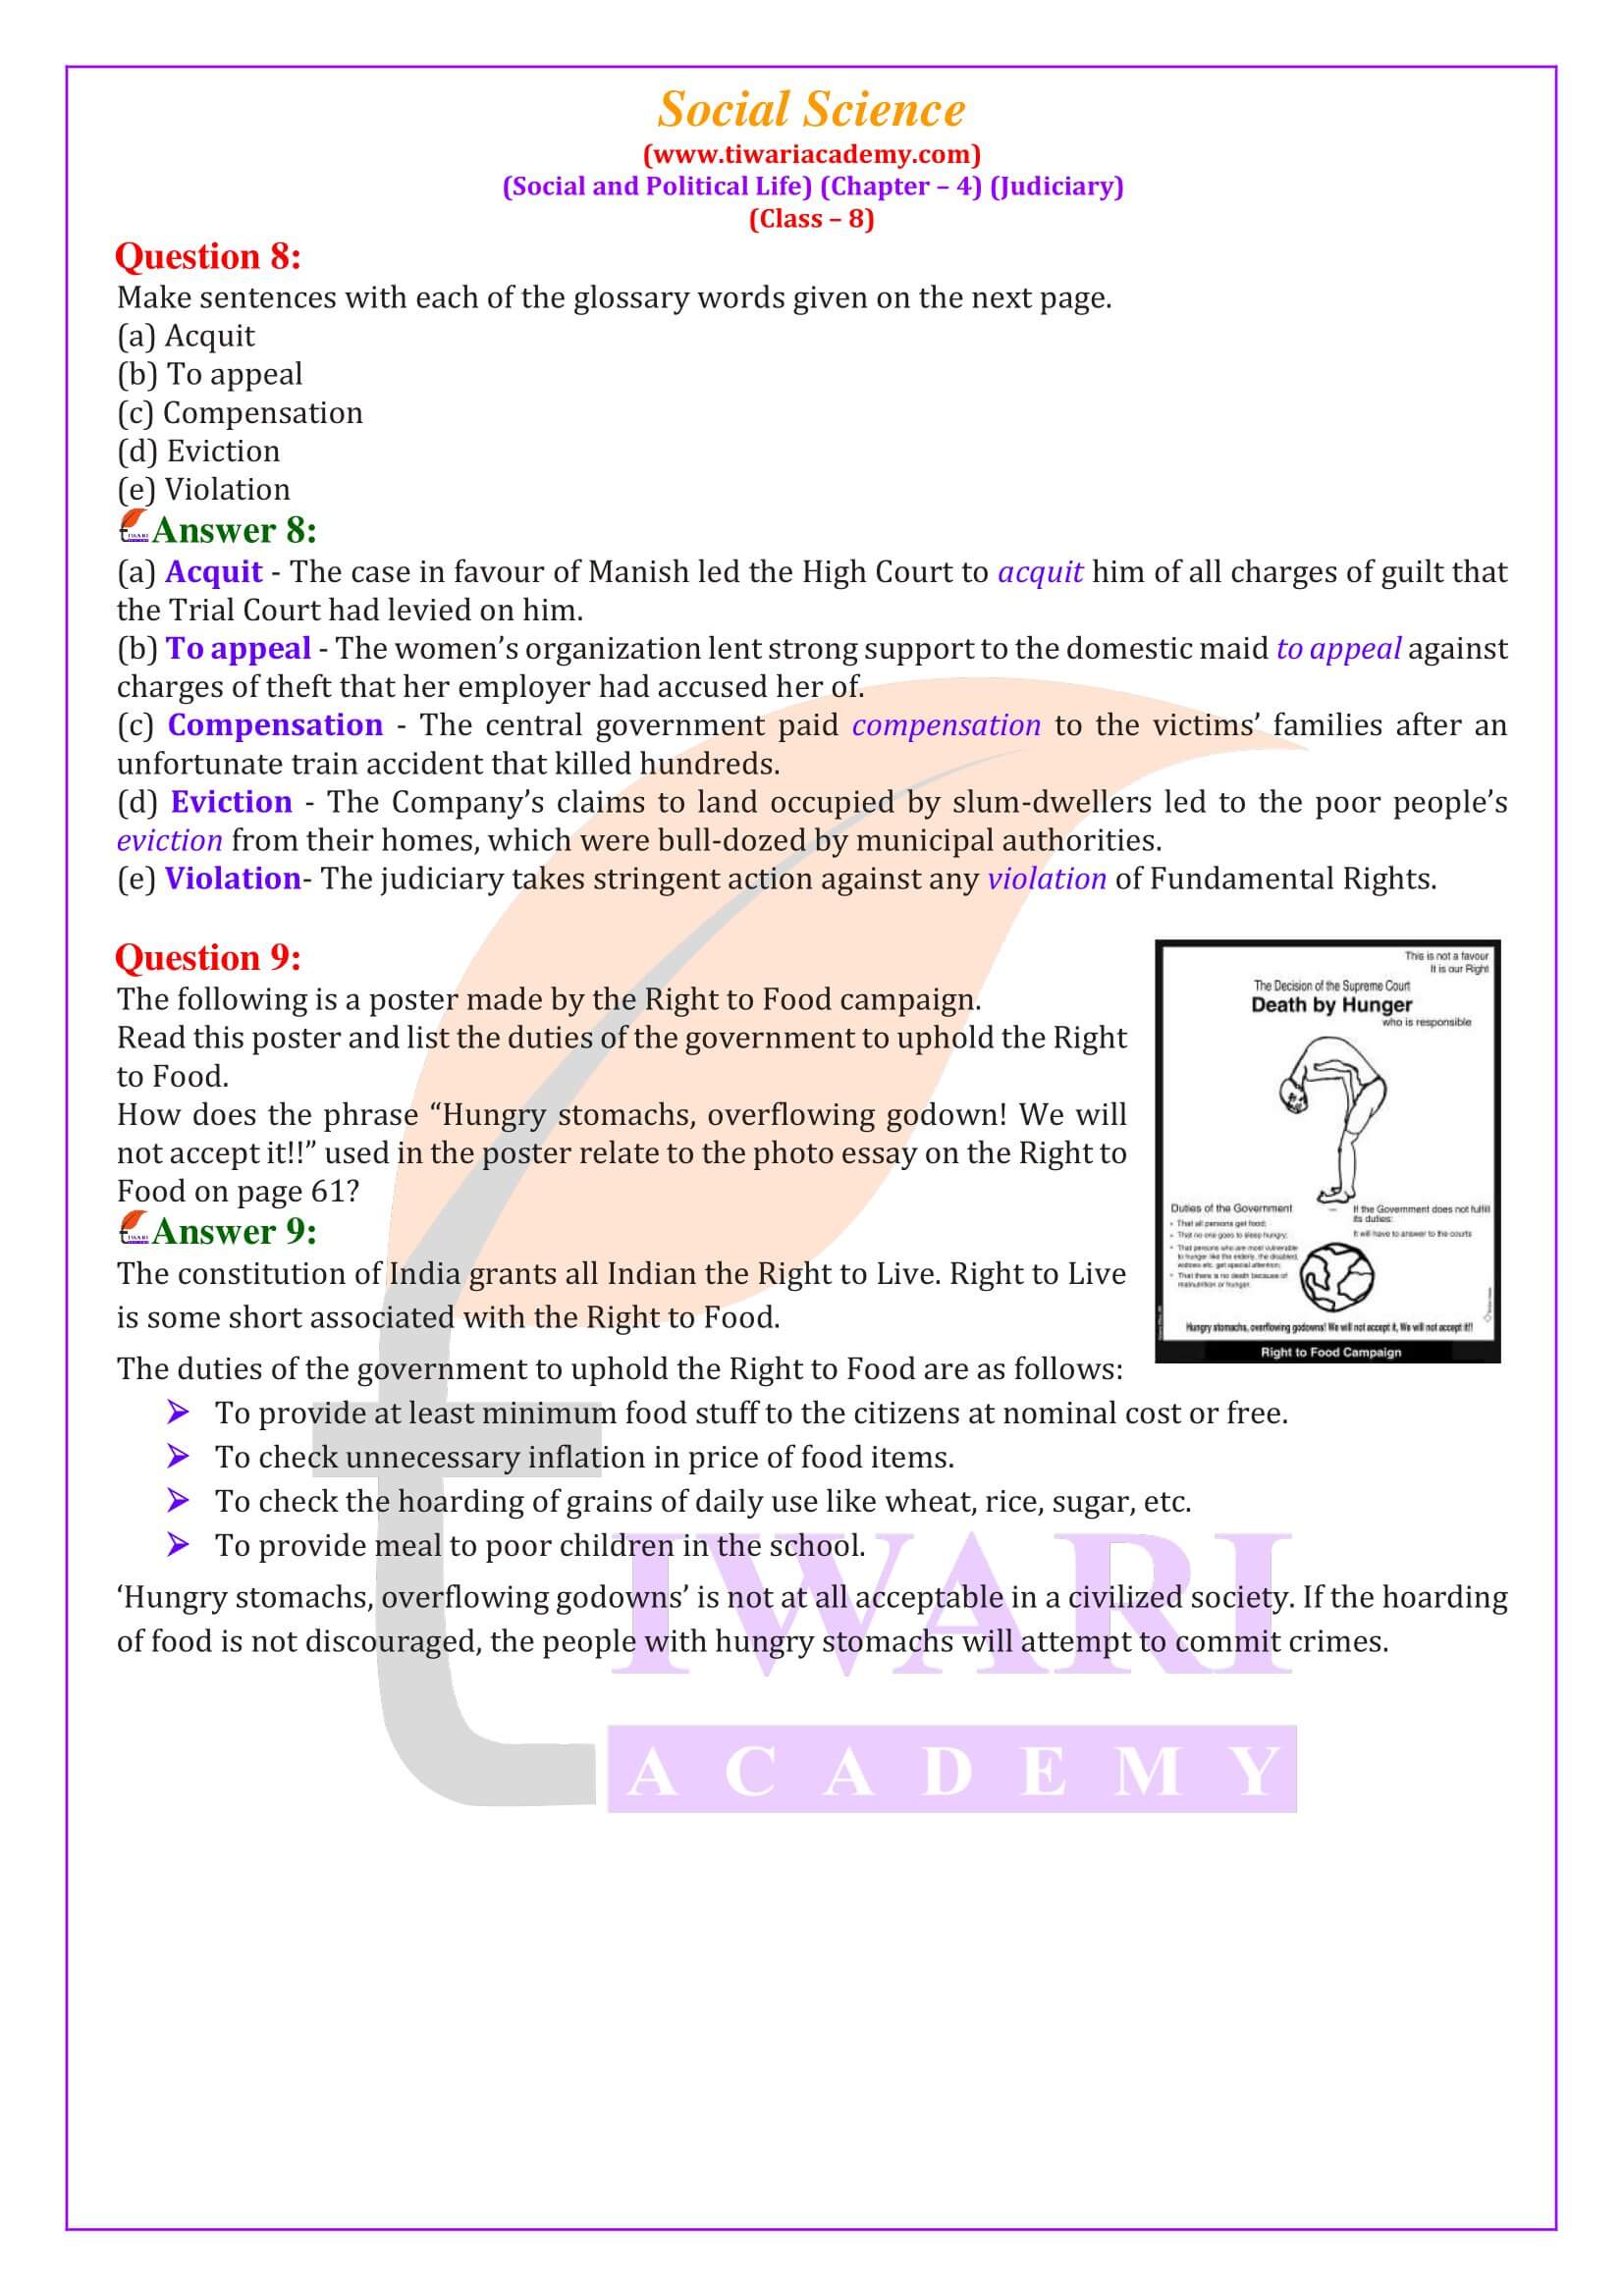 NCERT Solutions for Class 8 Social Science Civics Chapter 4 in English Medium